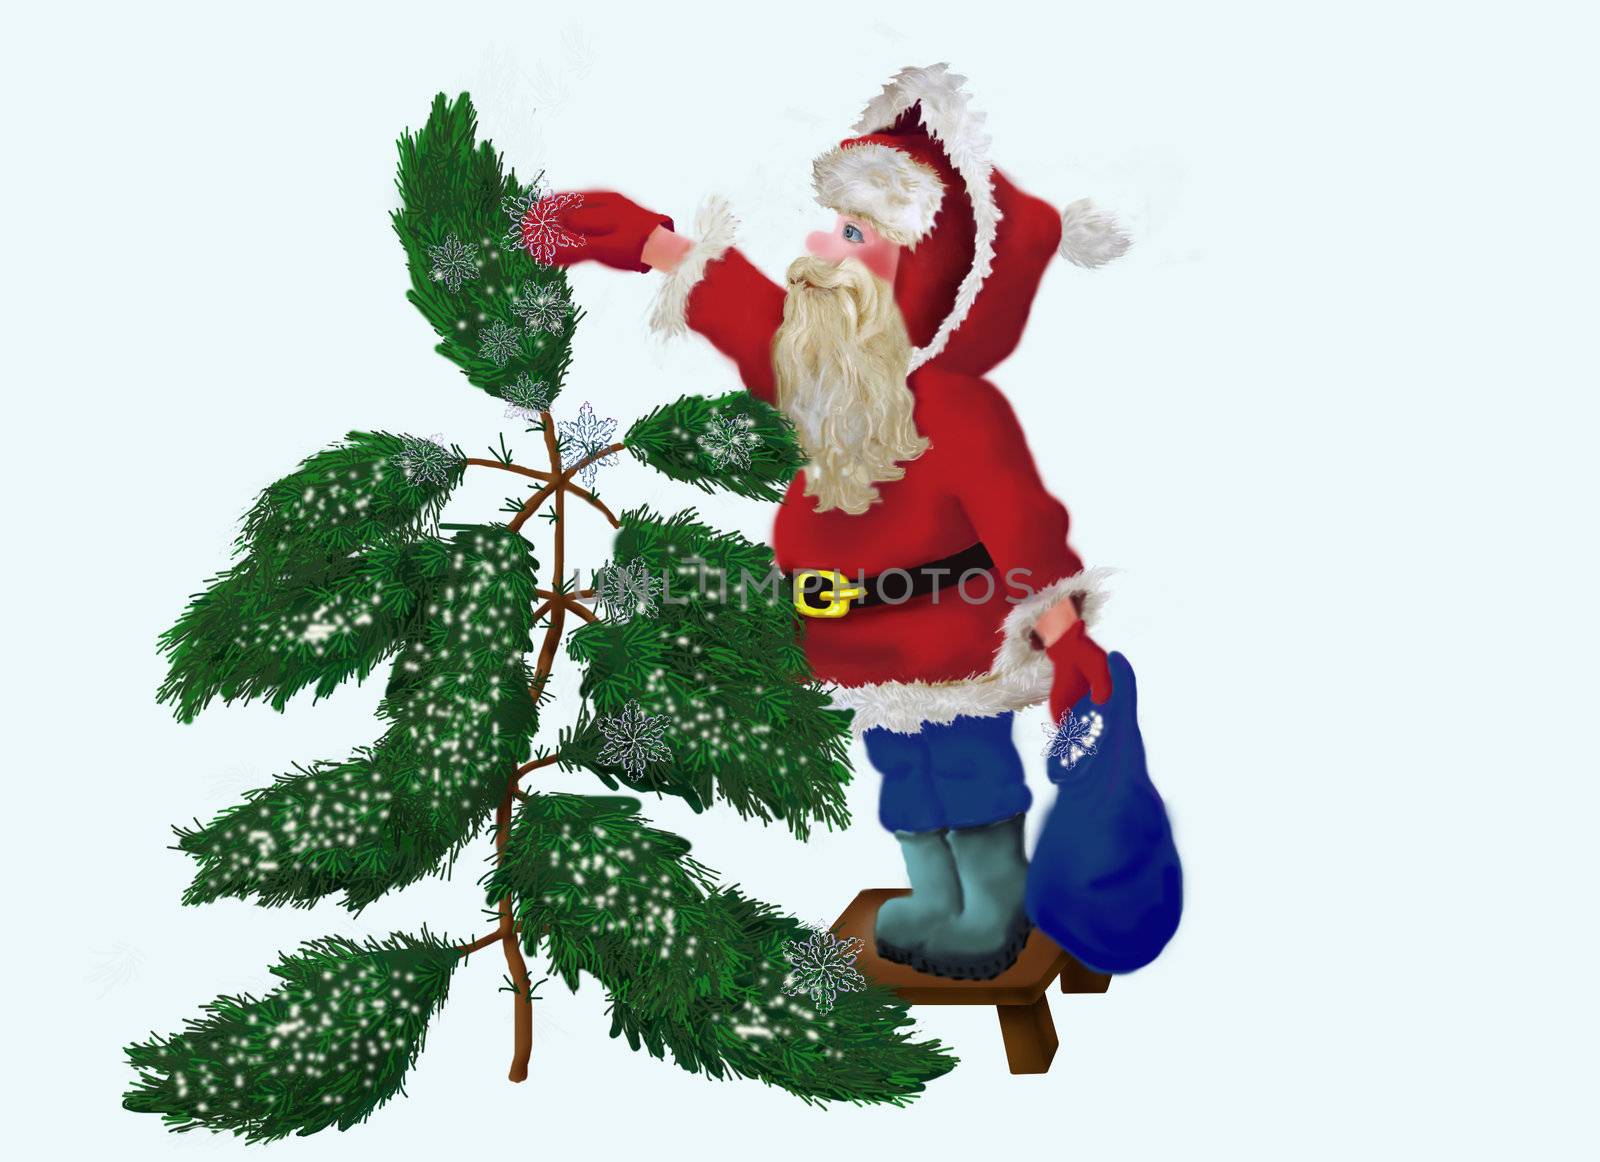 Santa Claus sifting Evergreen with snow by oliksun